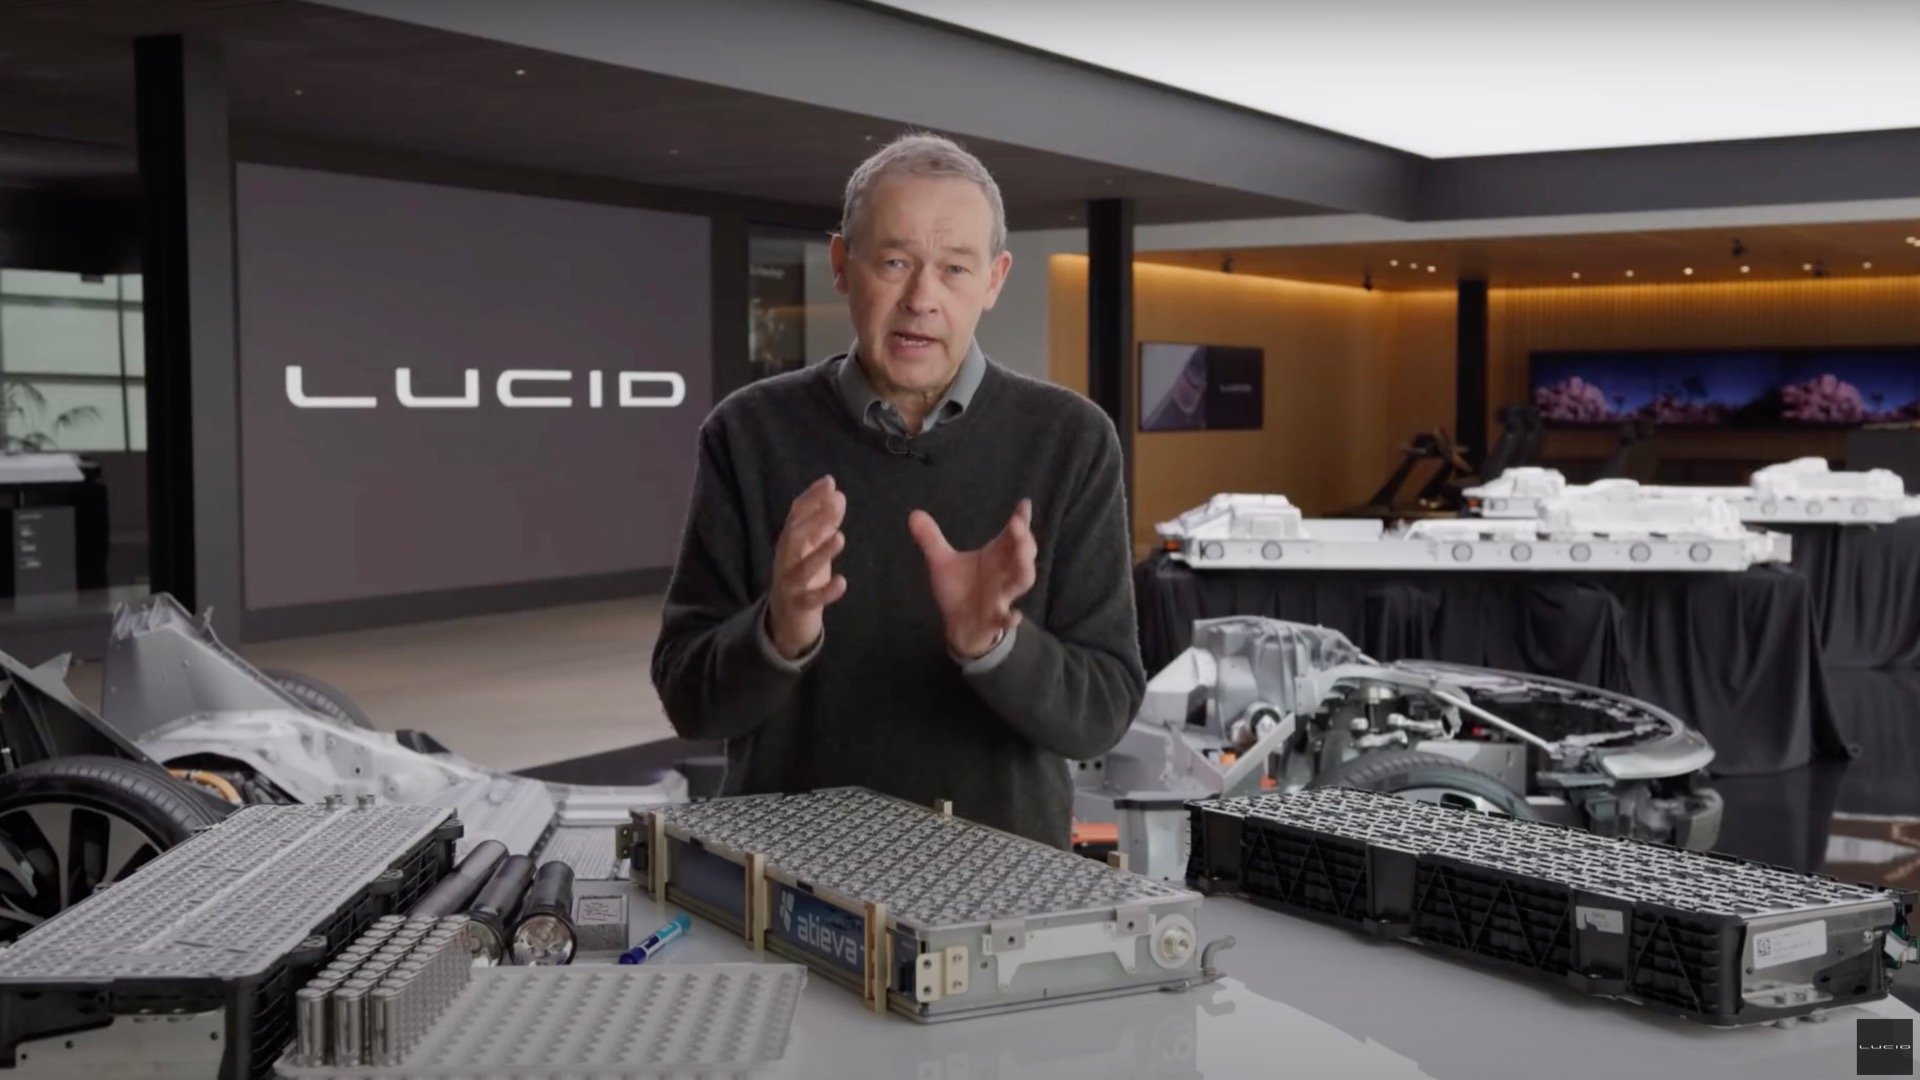 Energy, power, cells, modules, cooling: Watch Lucid's CEO give the best EV battery primer yet